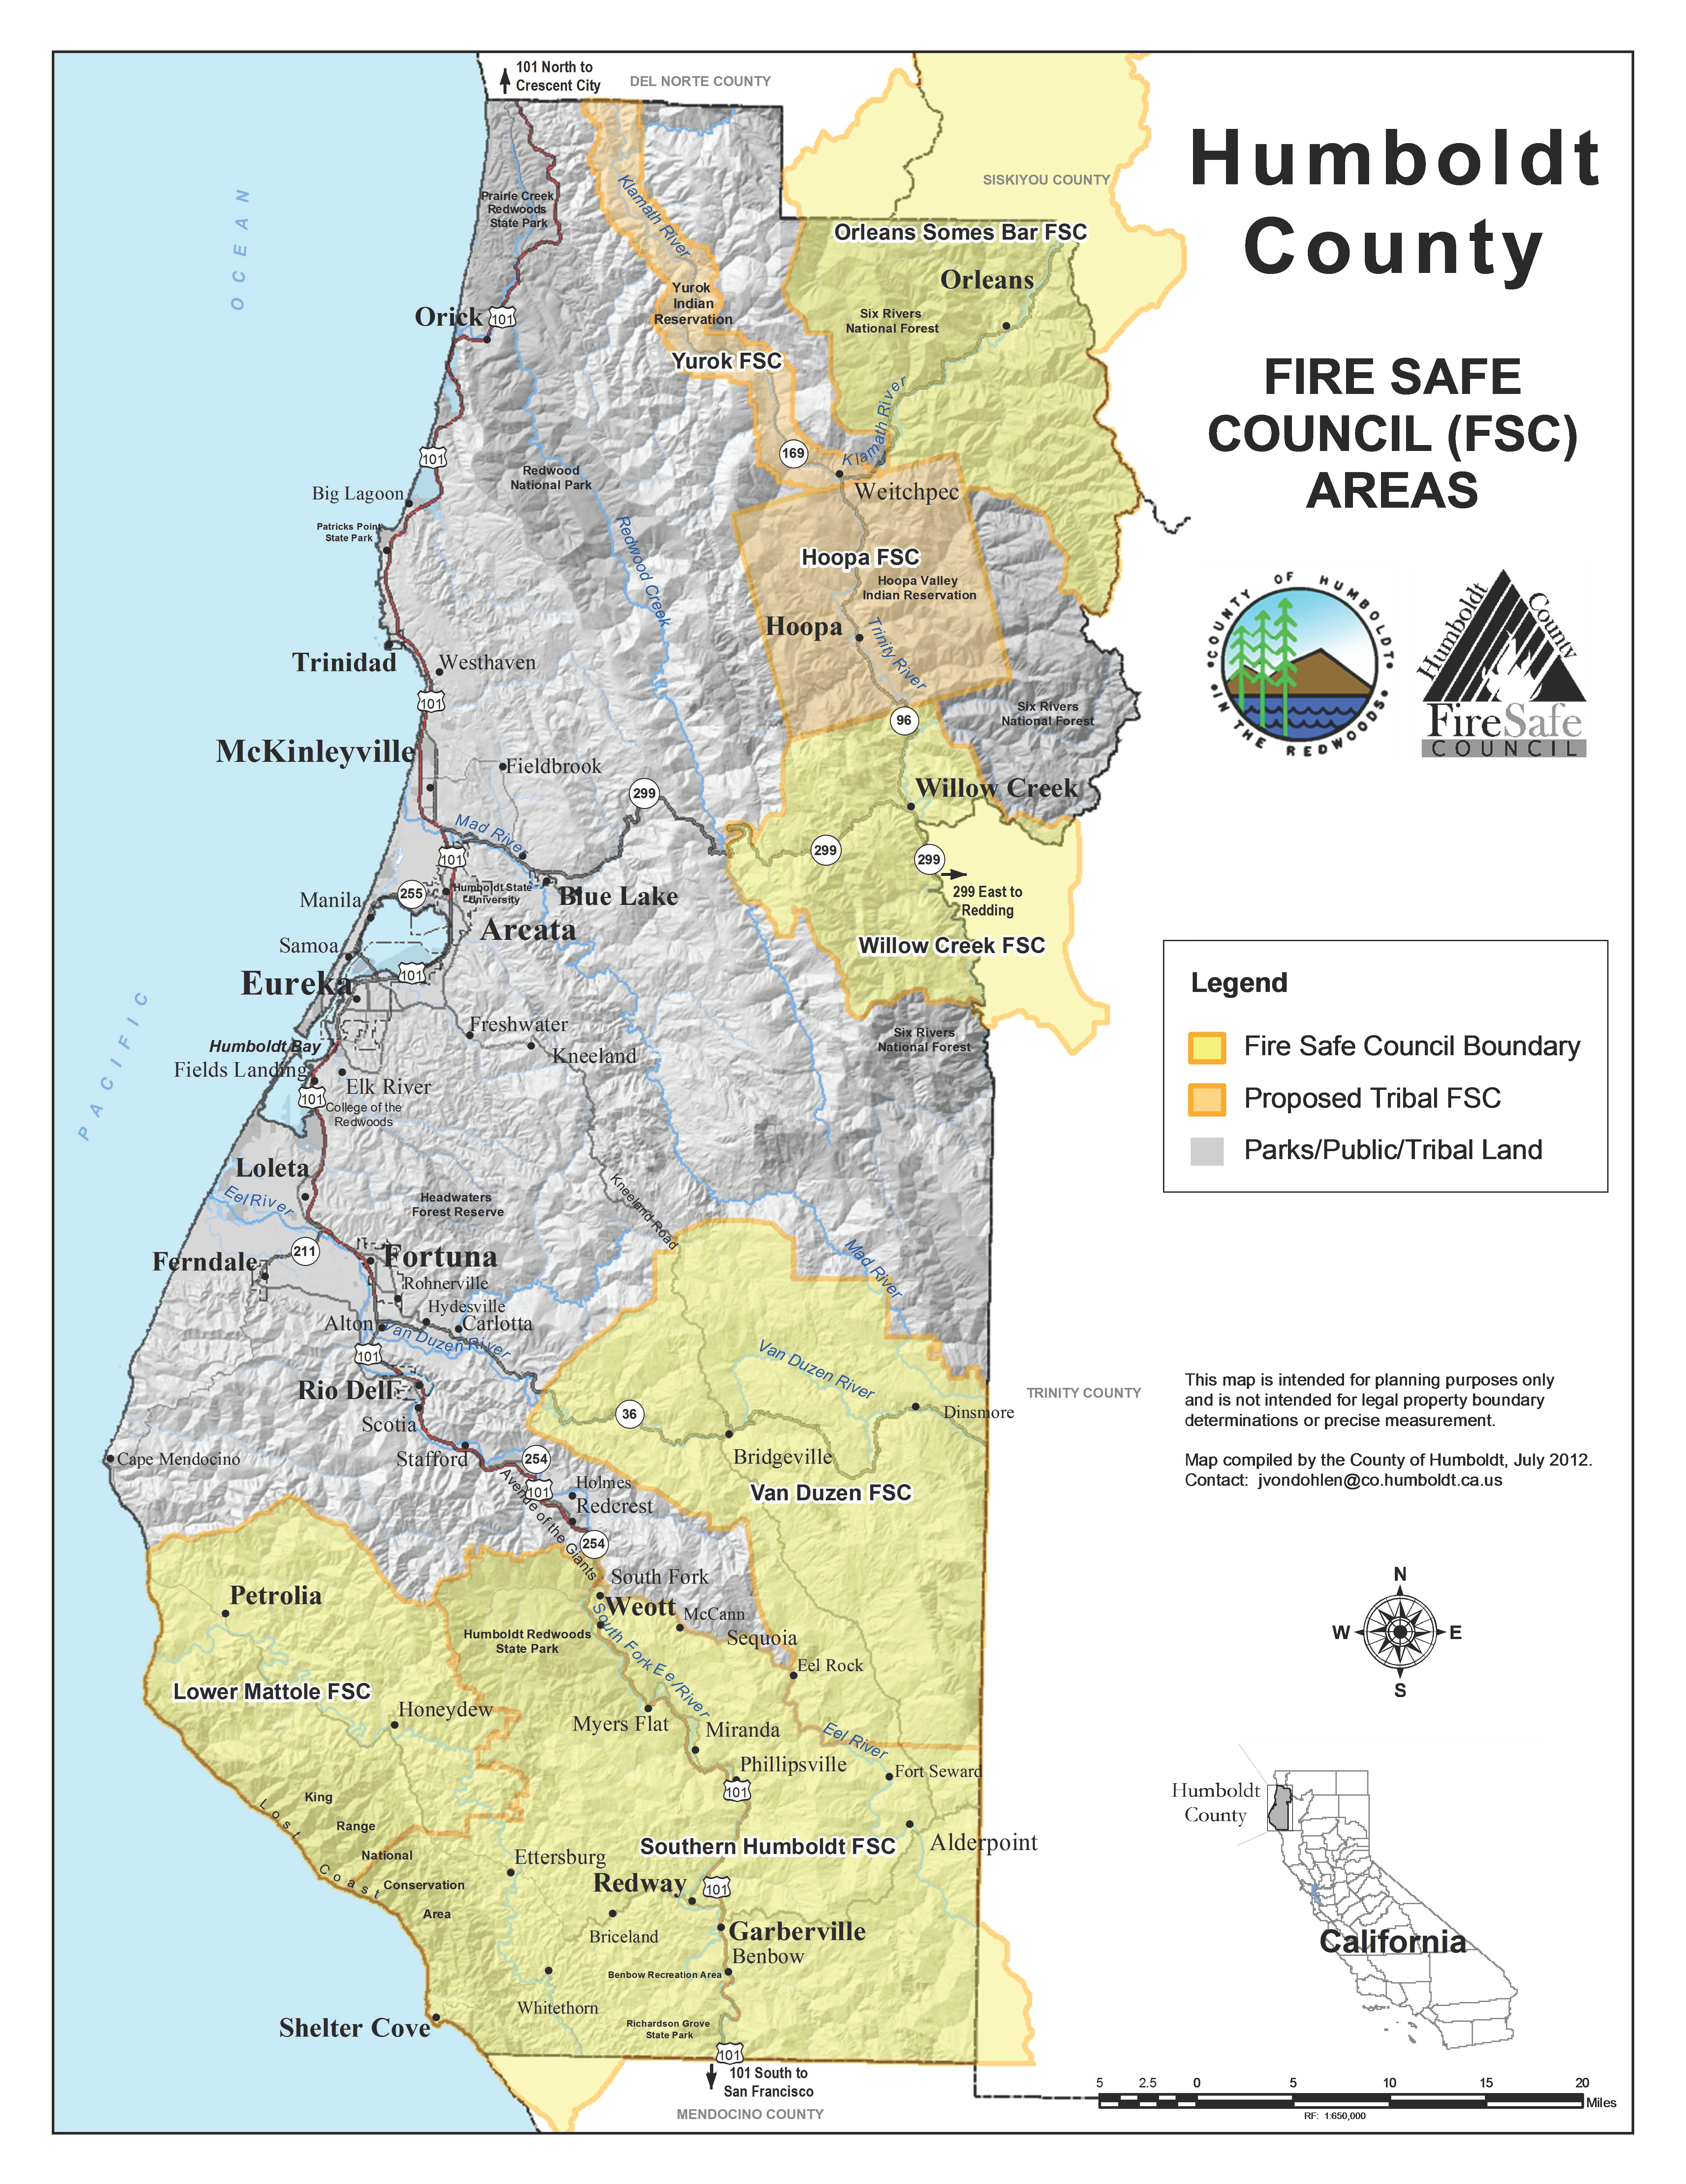 Map of areas served by Fire Safe Councils in Humboldt County